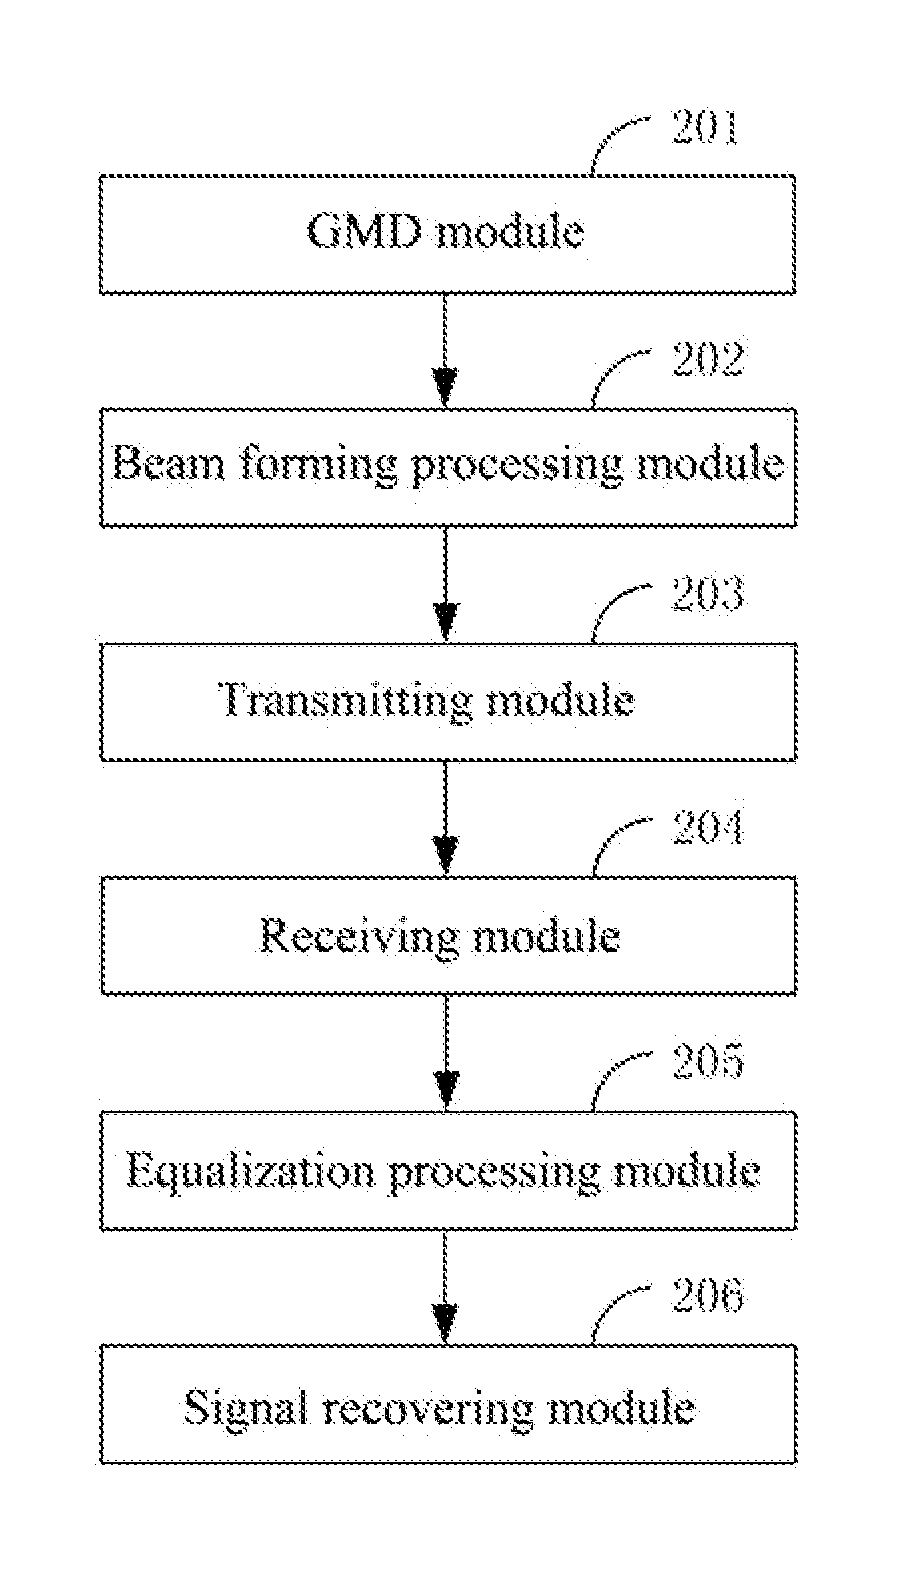 Method and System for Multi-Beam Forming Based on Joint Transceiver Information